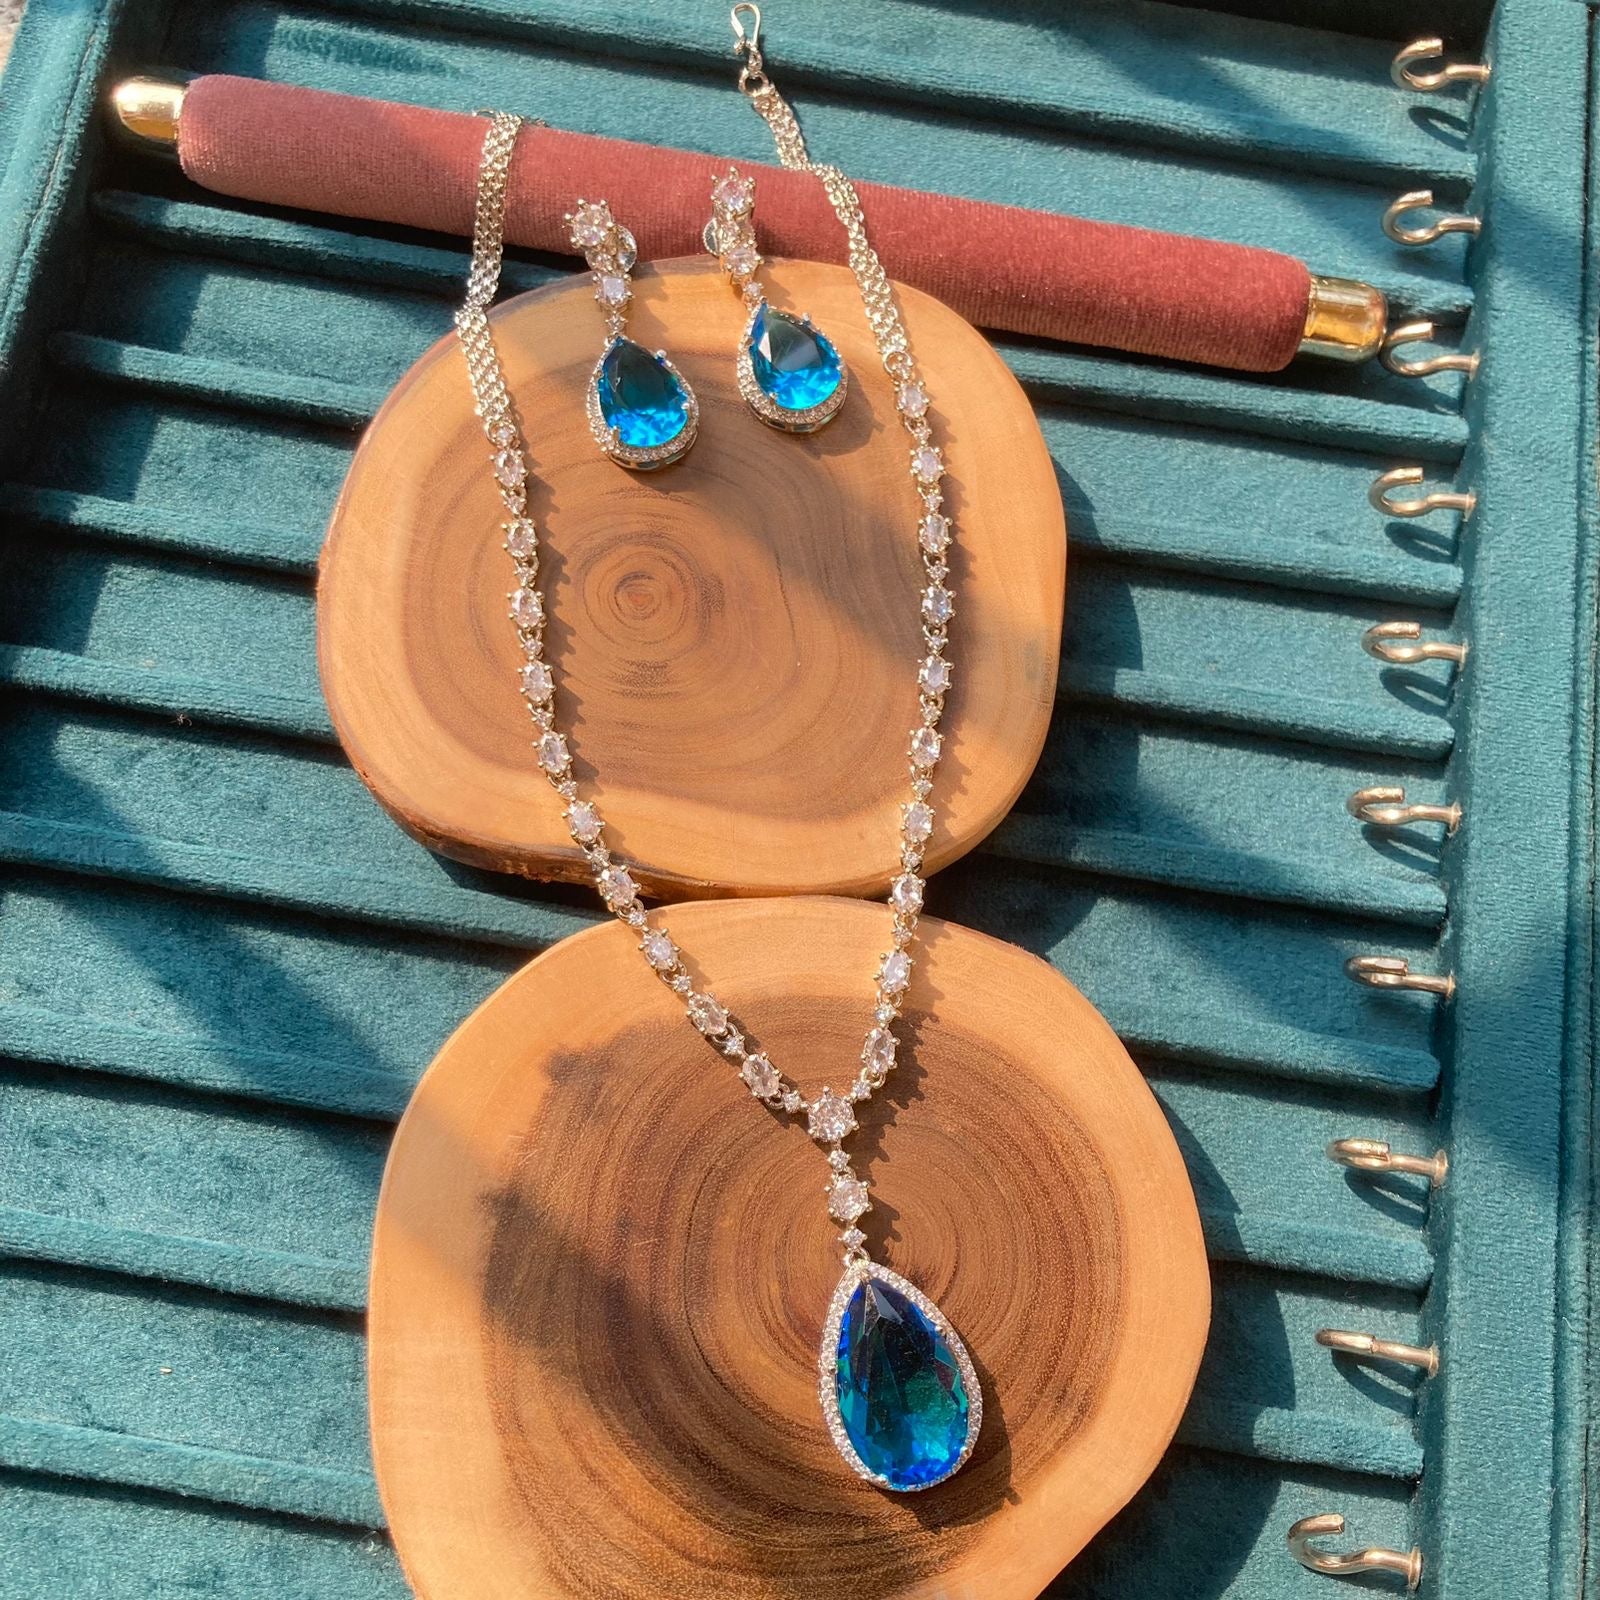 Pear Drop Necklace With Earrings